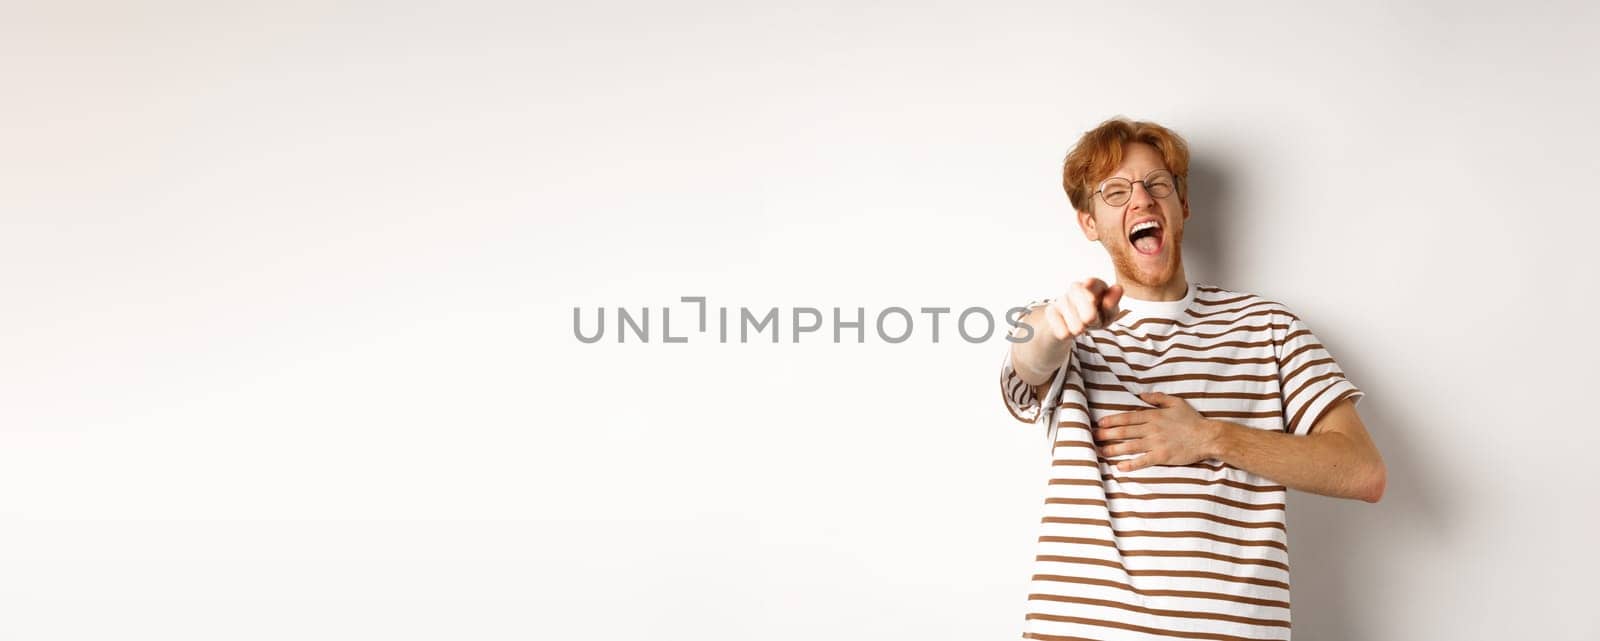 Young man with ginger hair and beard pointing finger at camera and laughing, making fun of someone hilarious, standing over white background.